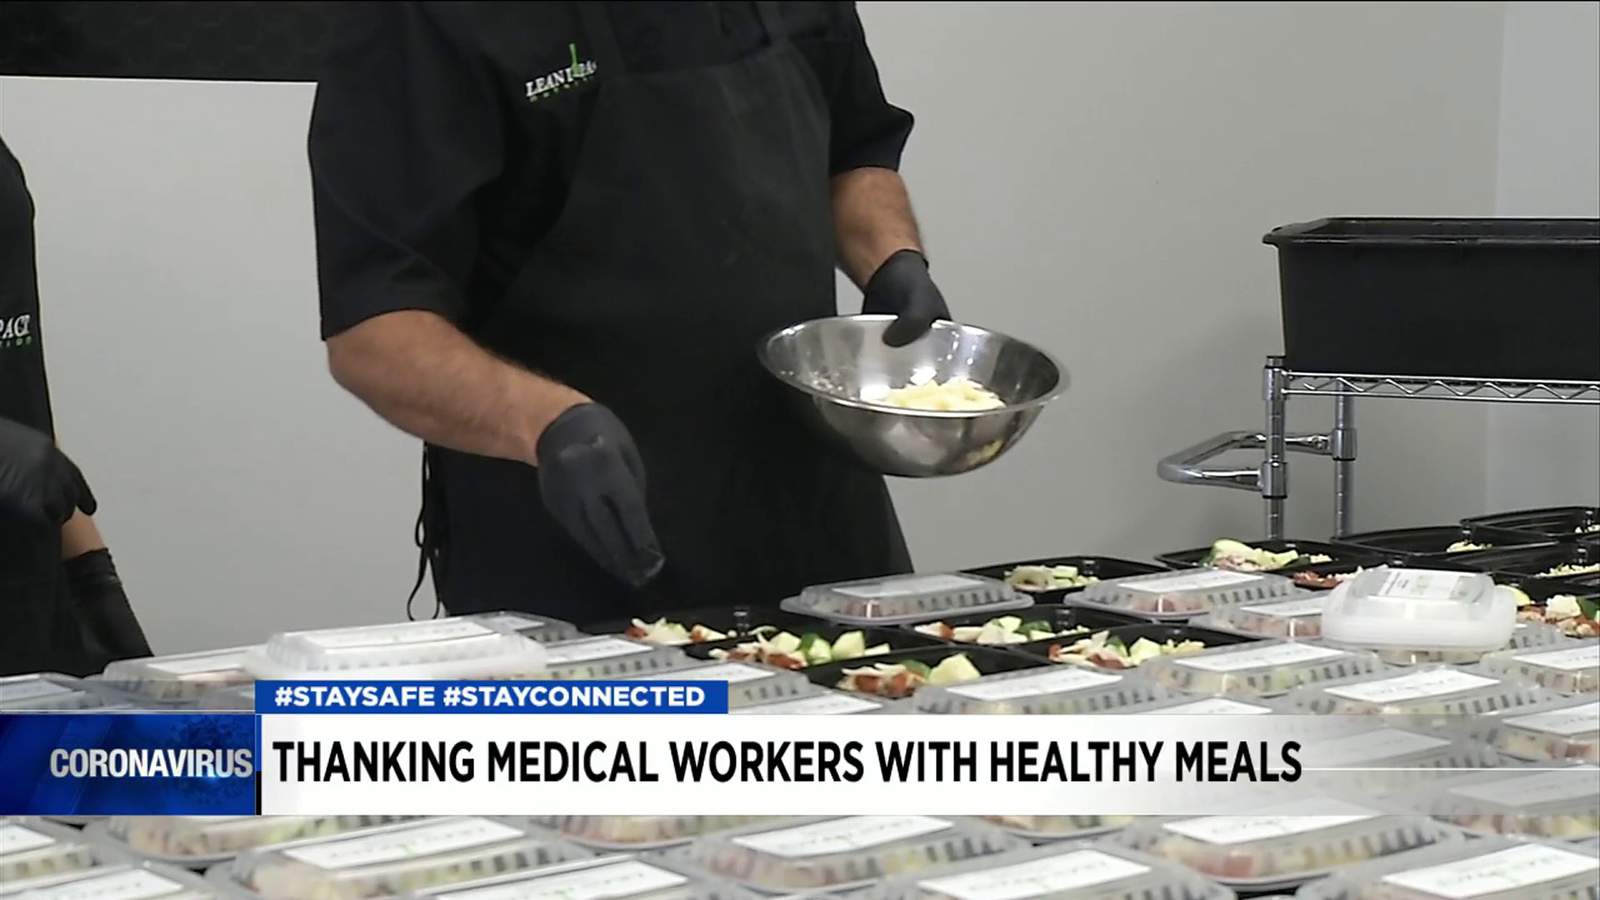 Thanking medical workers with healthy meals